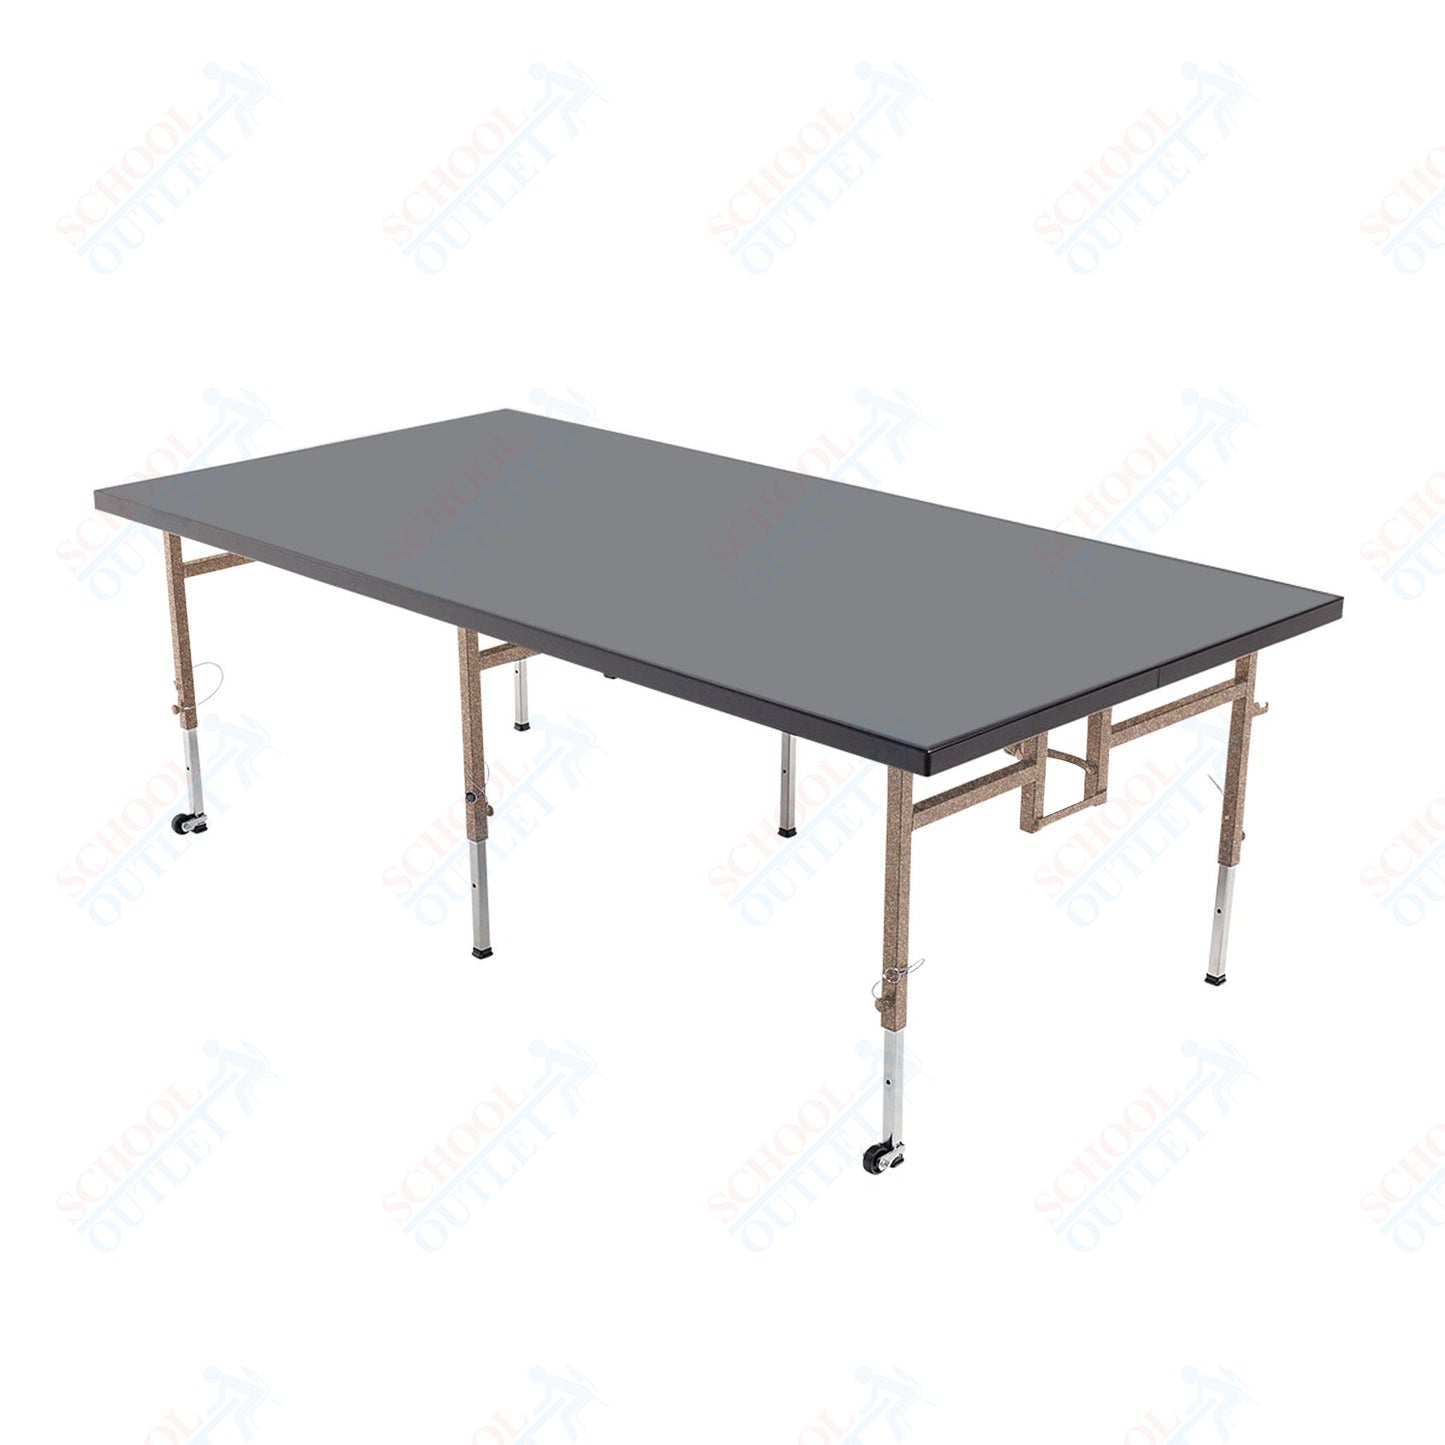 AmTab Adjustable Height Stage - Polypropylene Top - 36"W x 96"L x Adjustable 24" to 32"H  (AmTab AMT-STA3824P)